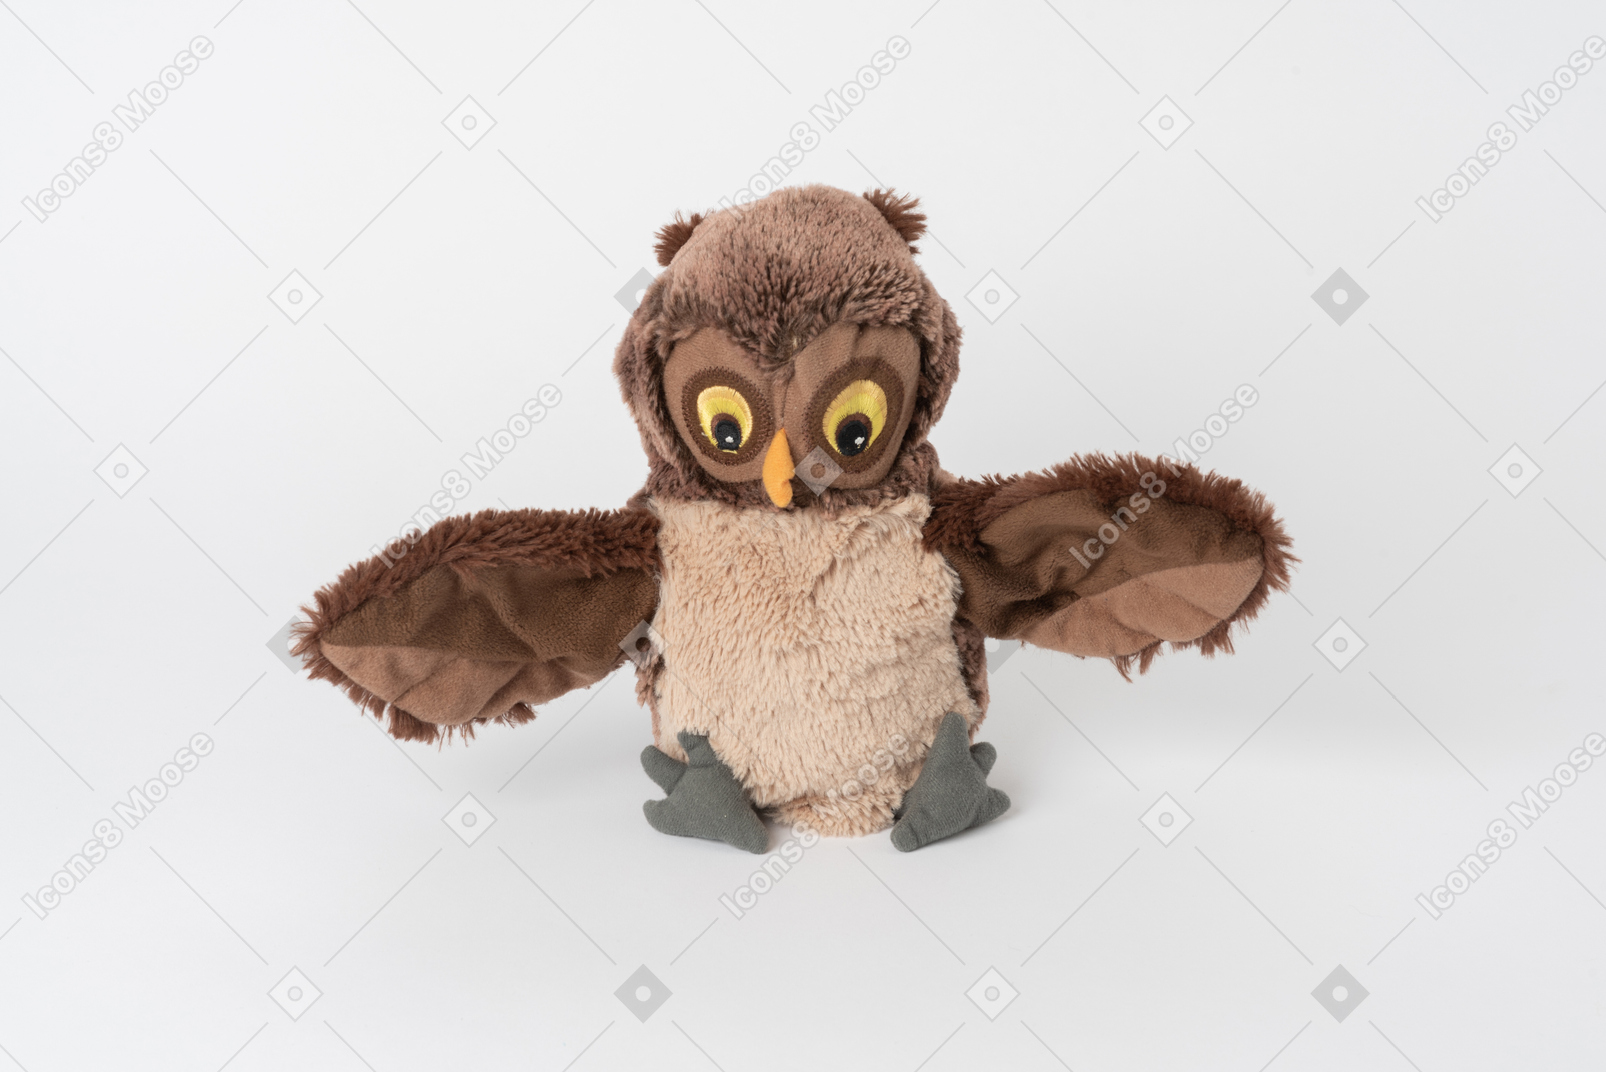 A cute brown plush owl sitting isolated against a plain white background